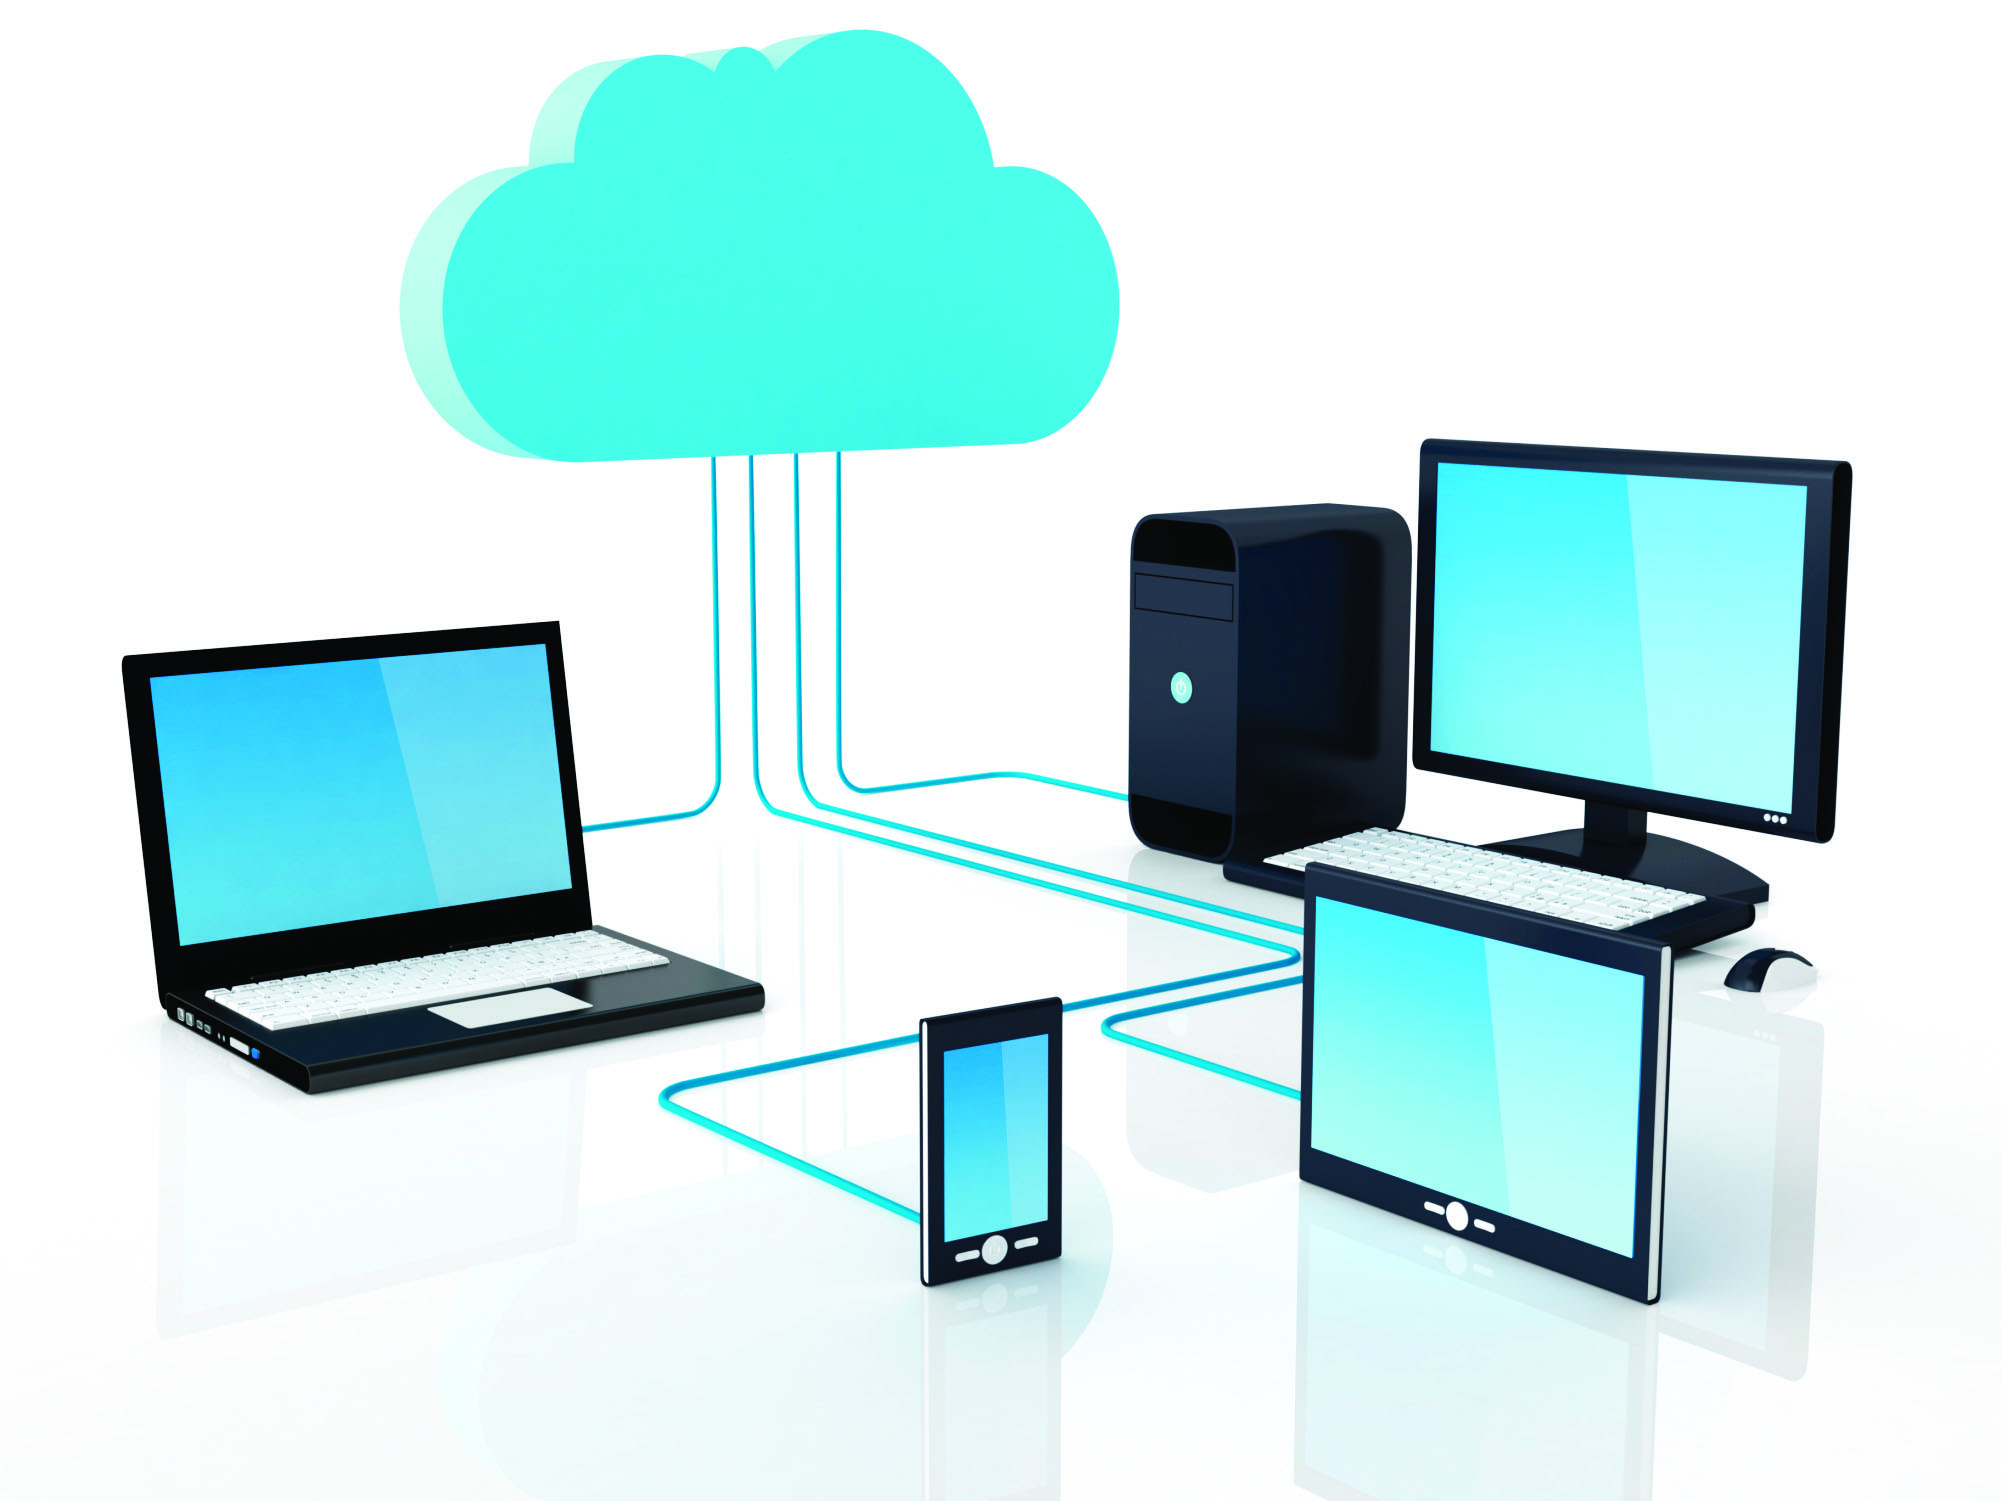 Backup to school with cloud-based data storage services